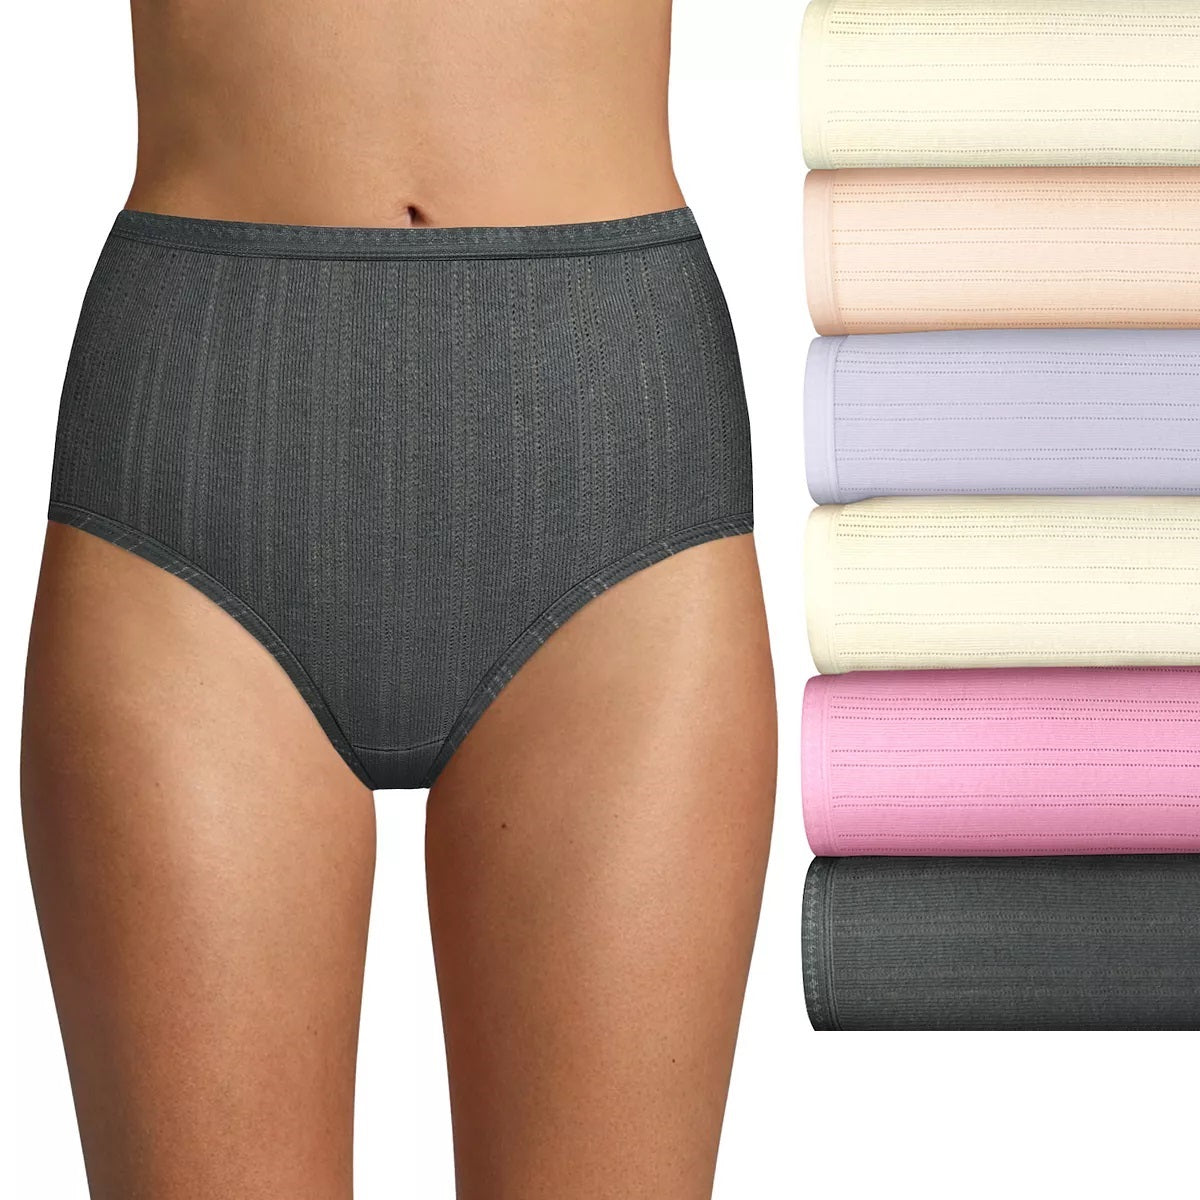 Hanes Womens Signature Cotton Breathe Briefs Underwear Pack, 6-Pack (Colors  May Vary)